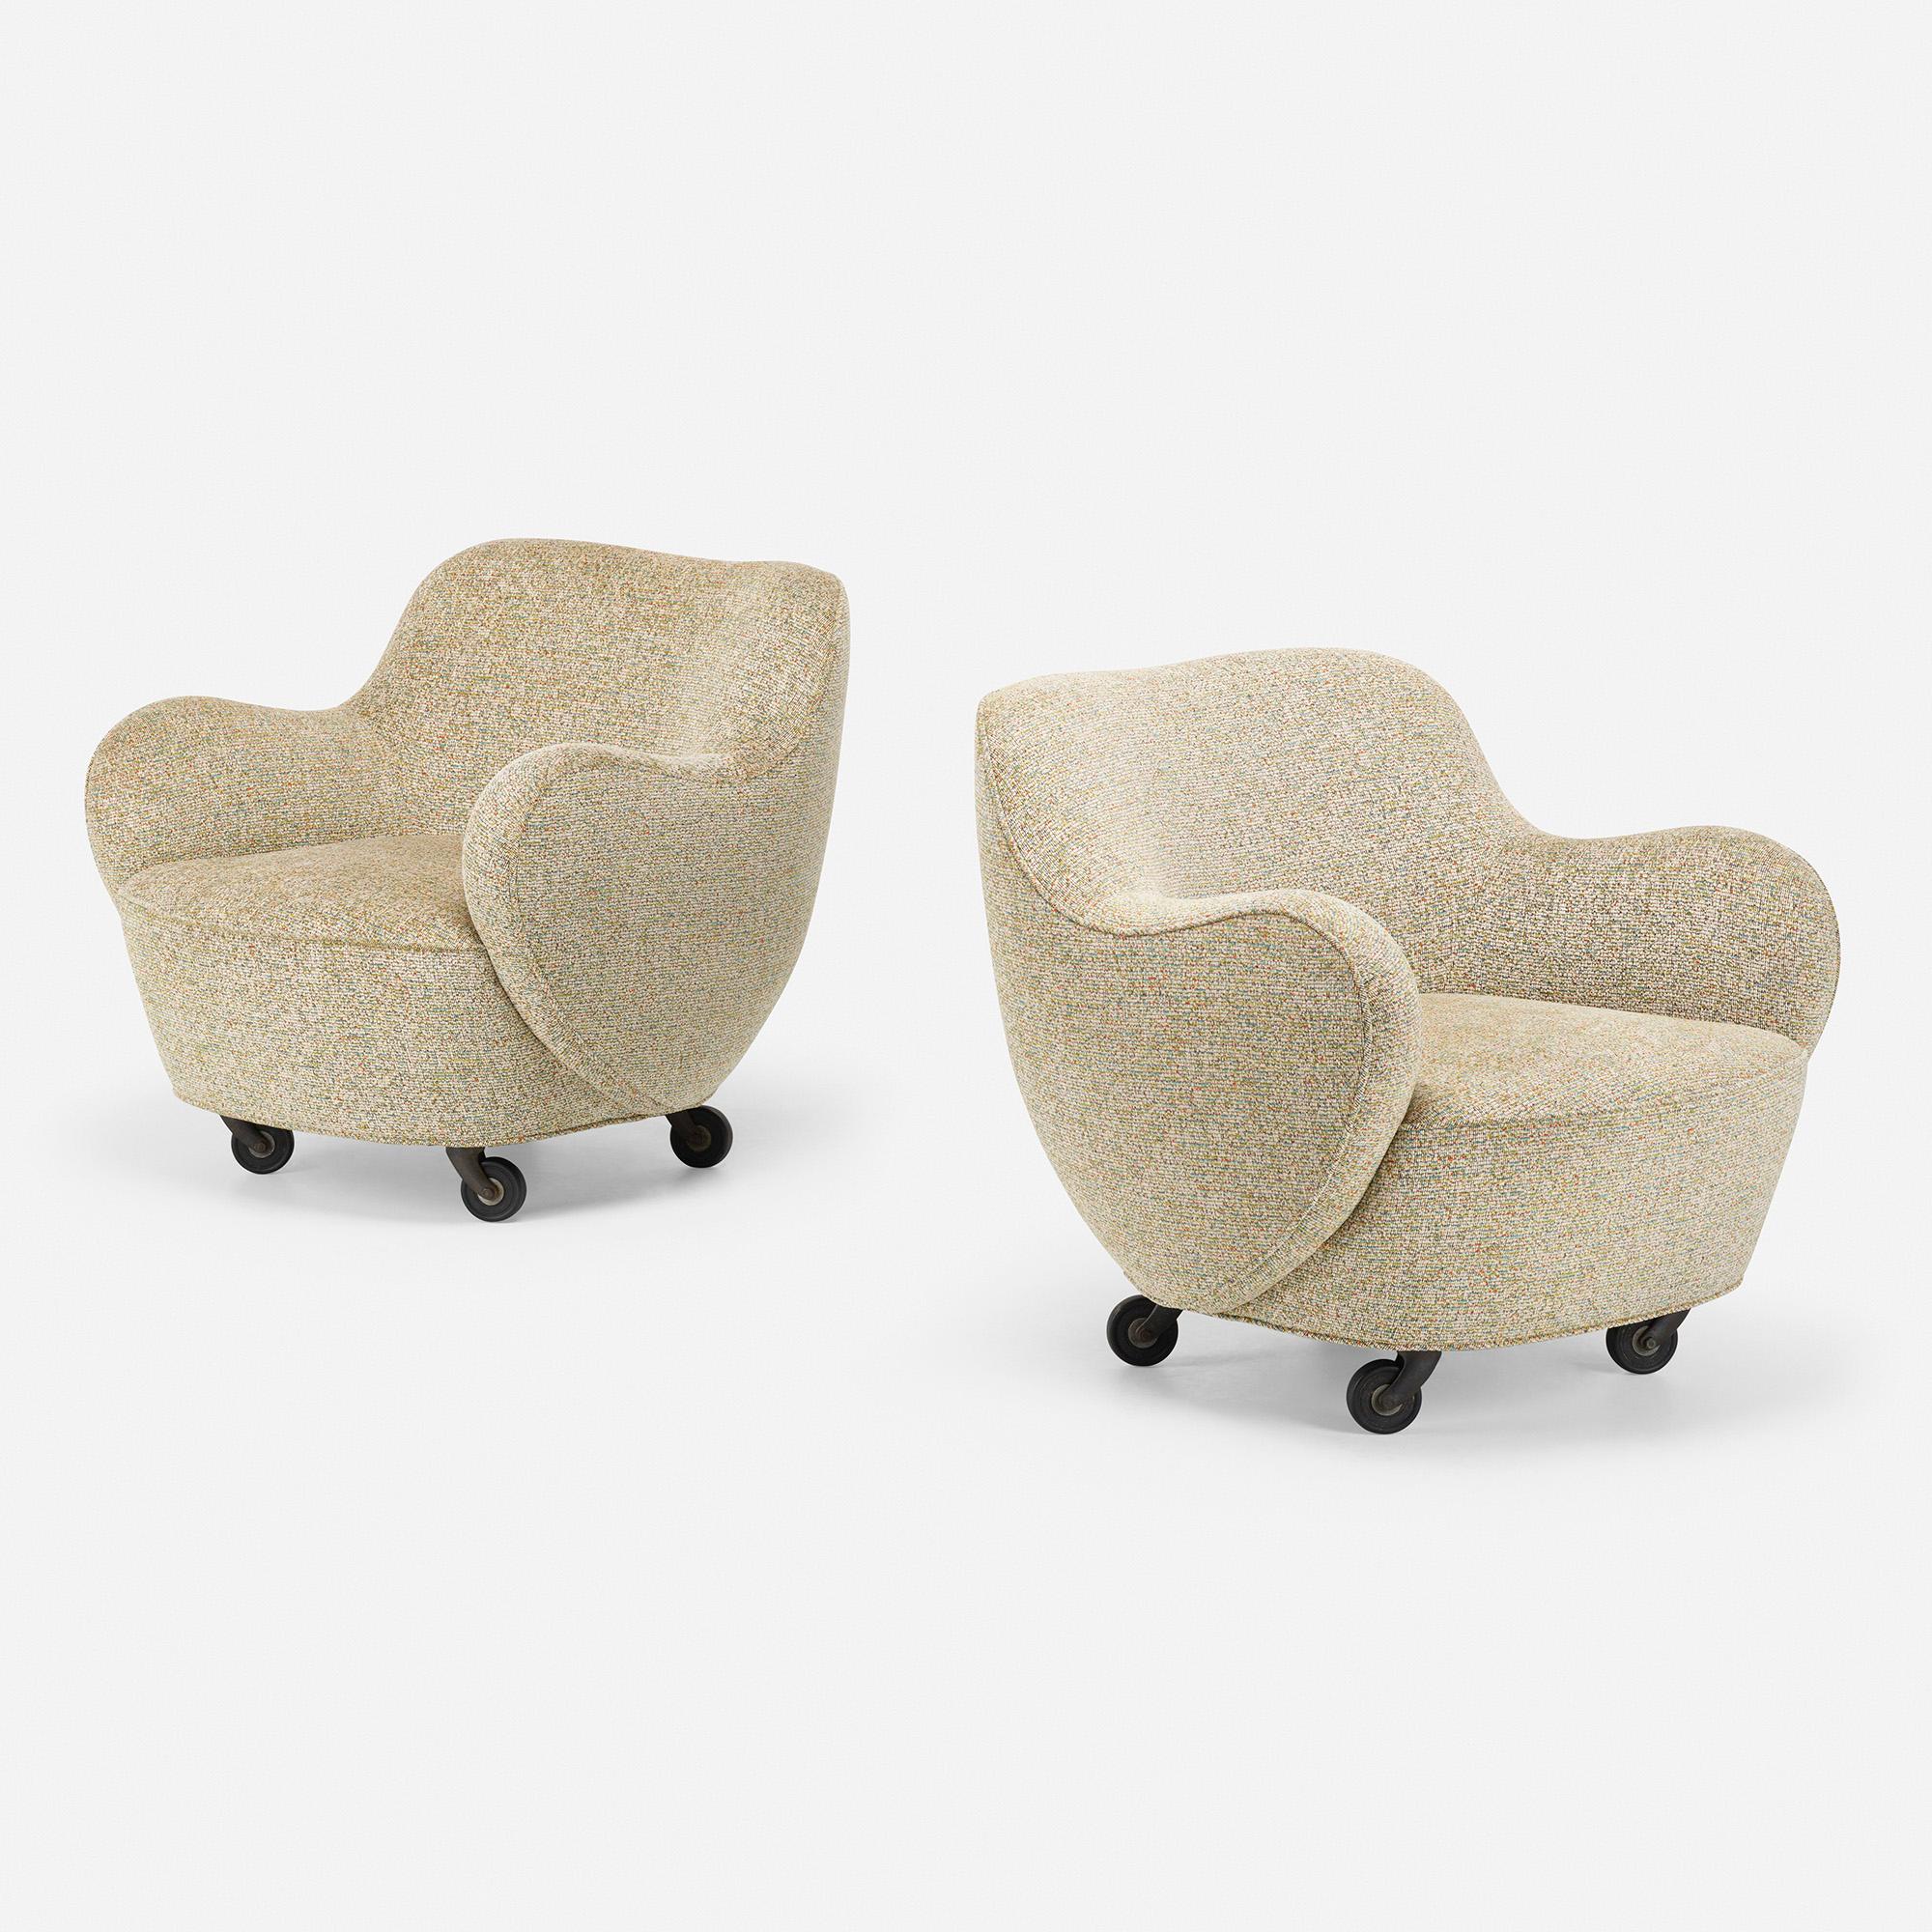 Made by: Vladimir Kagan Design Group, USA, 1947

Material: Knoll Atelier Confetti upholstery, casters

Size: 30 w × 30 d × 27.5 h in seat height 15 inches.